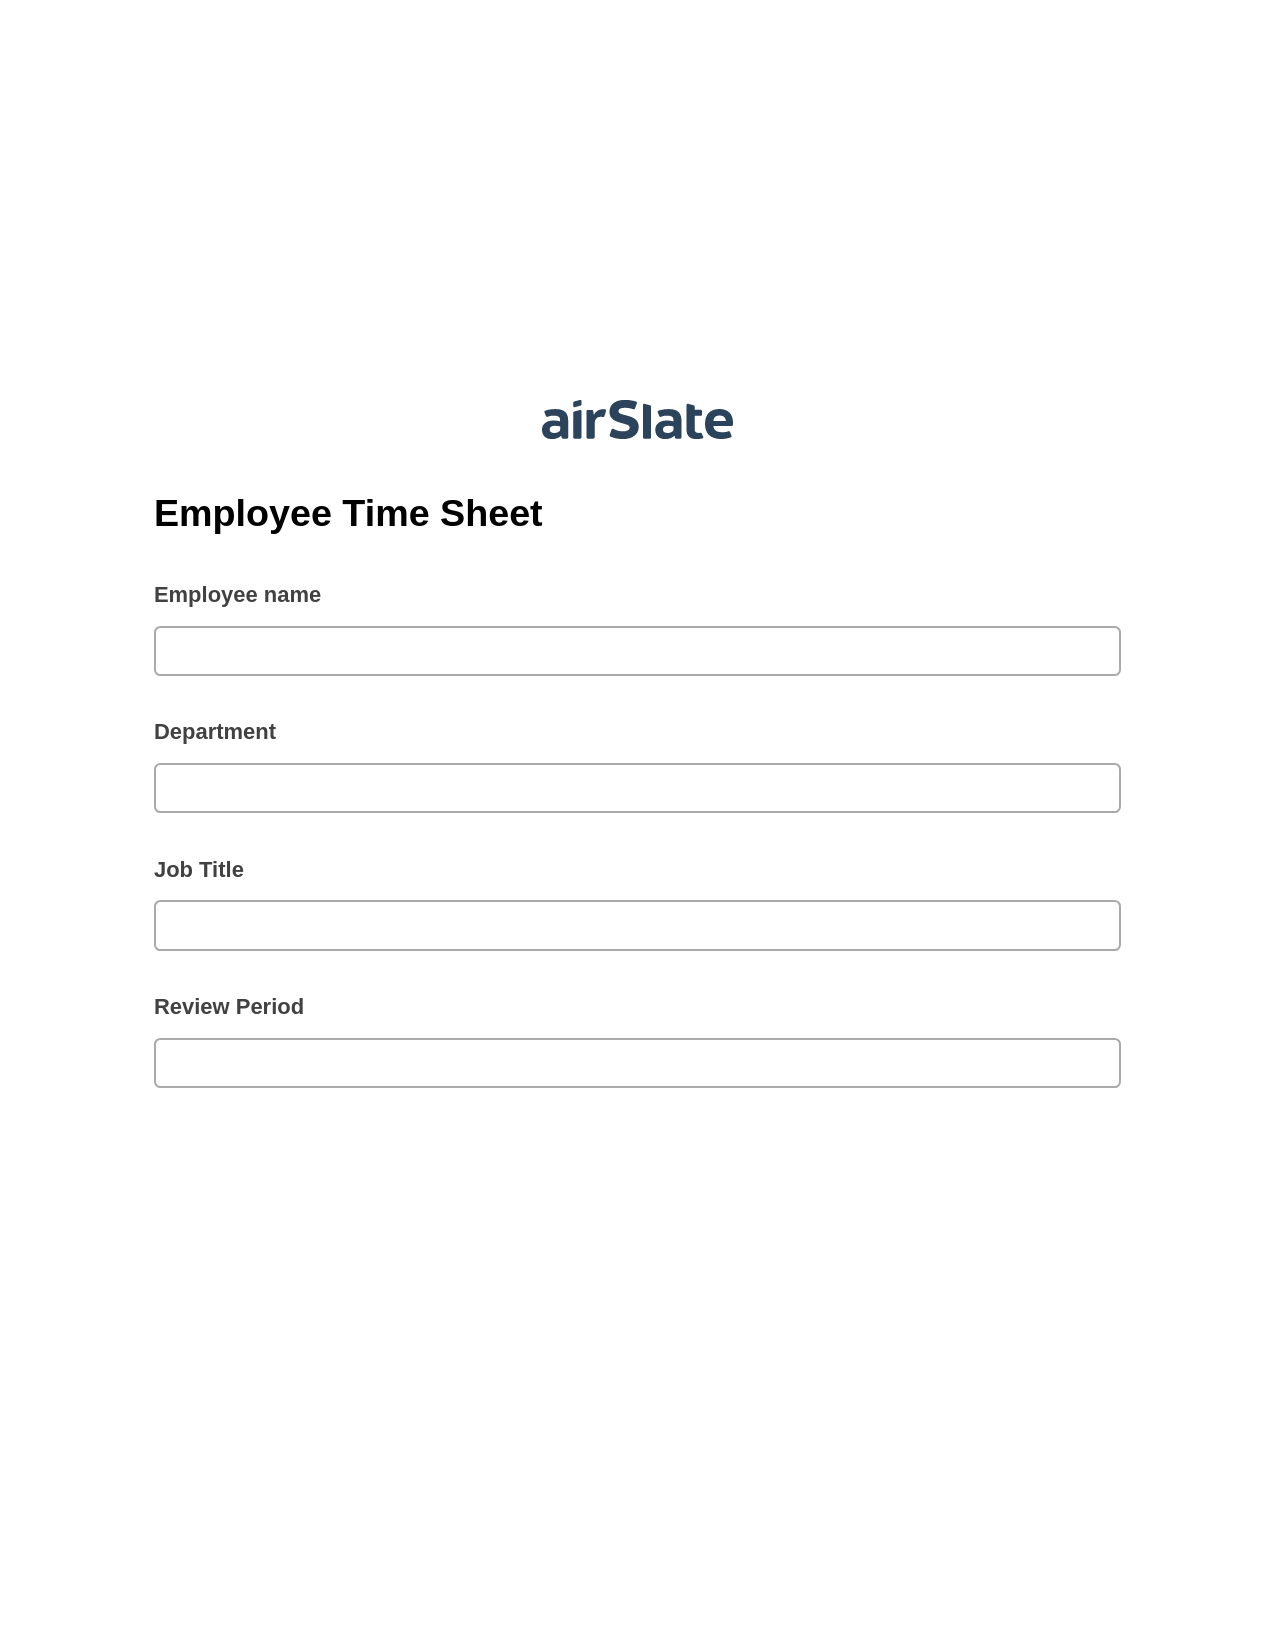 Employee Time Sheet Pre-fill from Salesforce Records Bot, Update Audit Trail Bot, Export to NetSuite Bot